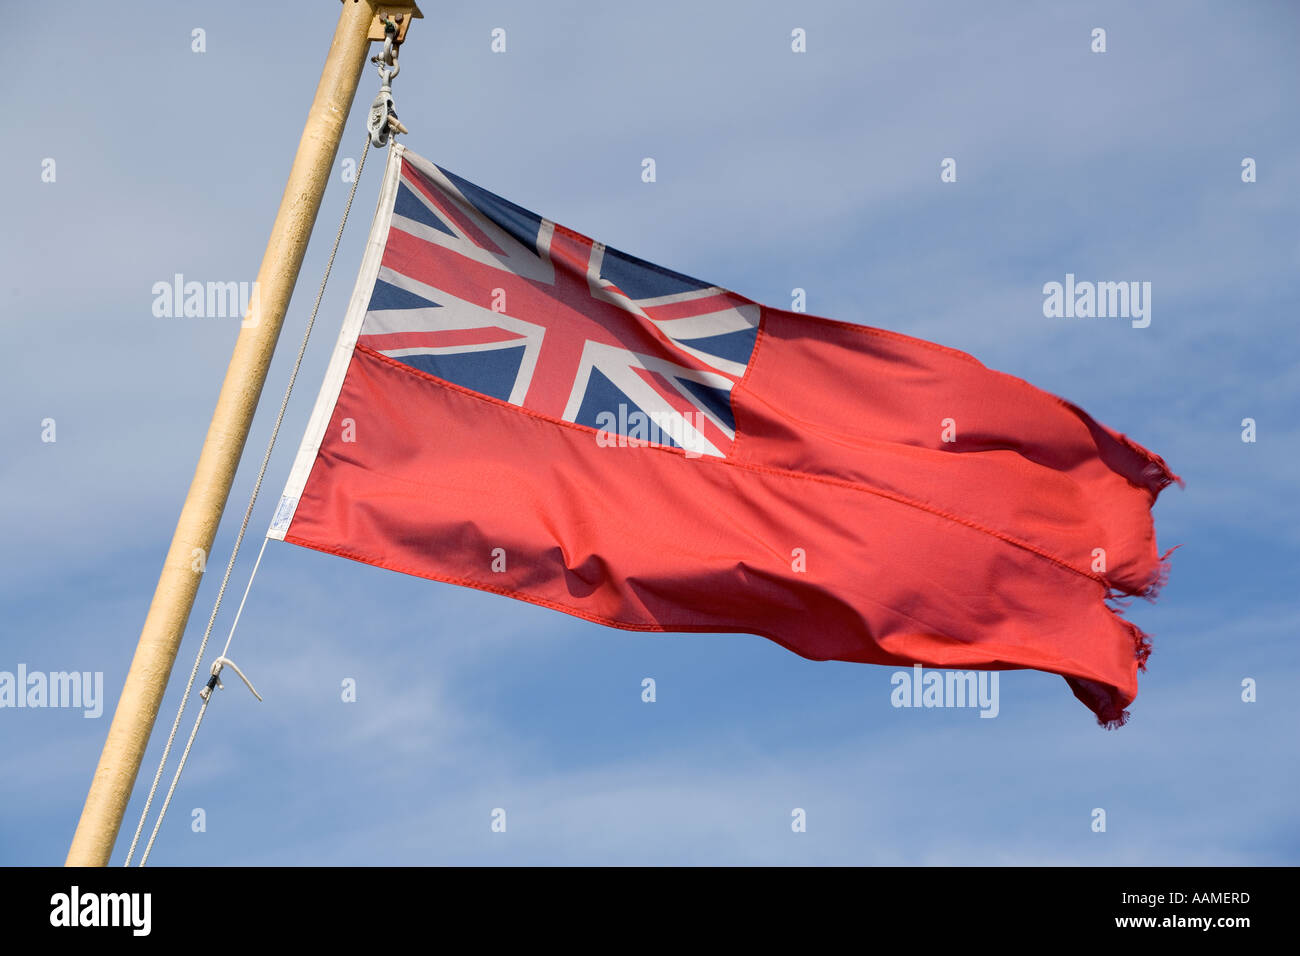 UK Seafaring the Red Ensign flag of the British merchant marine Stock Photo